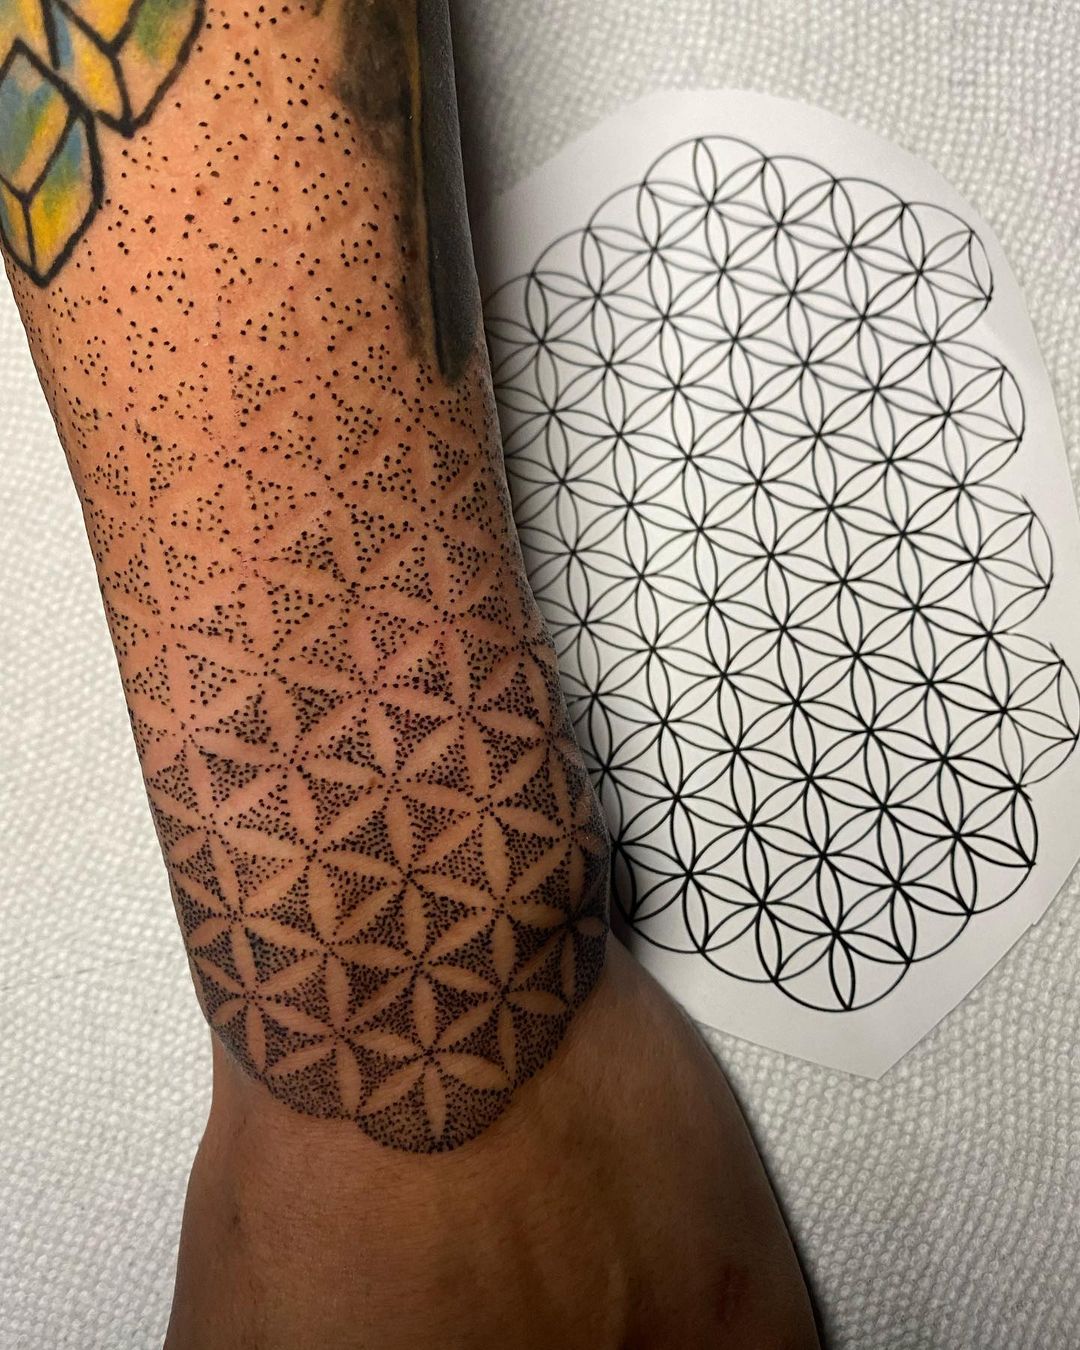 Flower of life smaller than usual love these patterns again all dotwork   Pattern tattoo Geometric tattoo flower of life Geometric tattoo